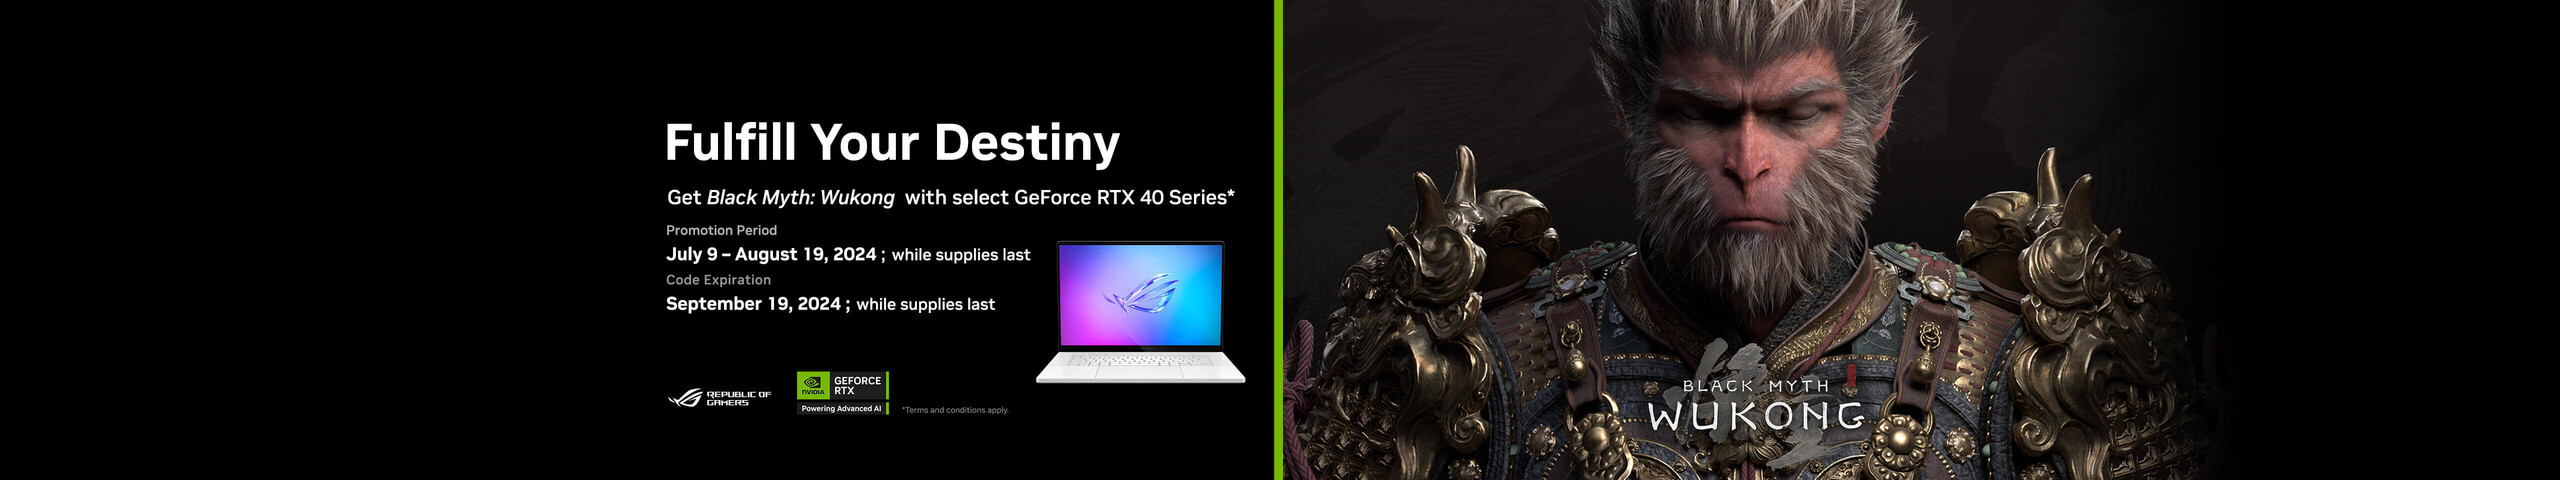 Image of Black Myth WuKong.  Get Black Myth:  Wukong with select GeForce RTX 40 Series* Promotion Period July 9-August 19, 2024; while suppliest last.  Code Expiration:  September 19, 2024; while supplies last.